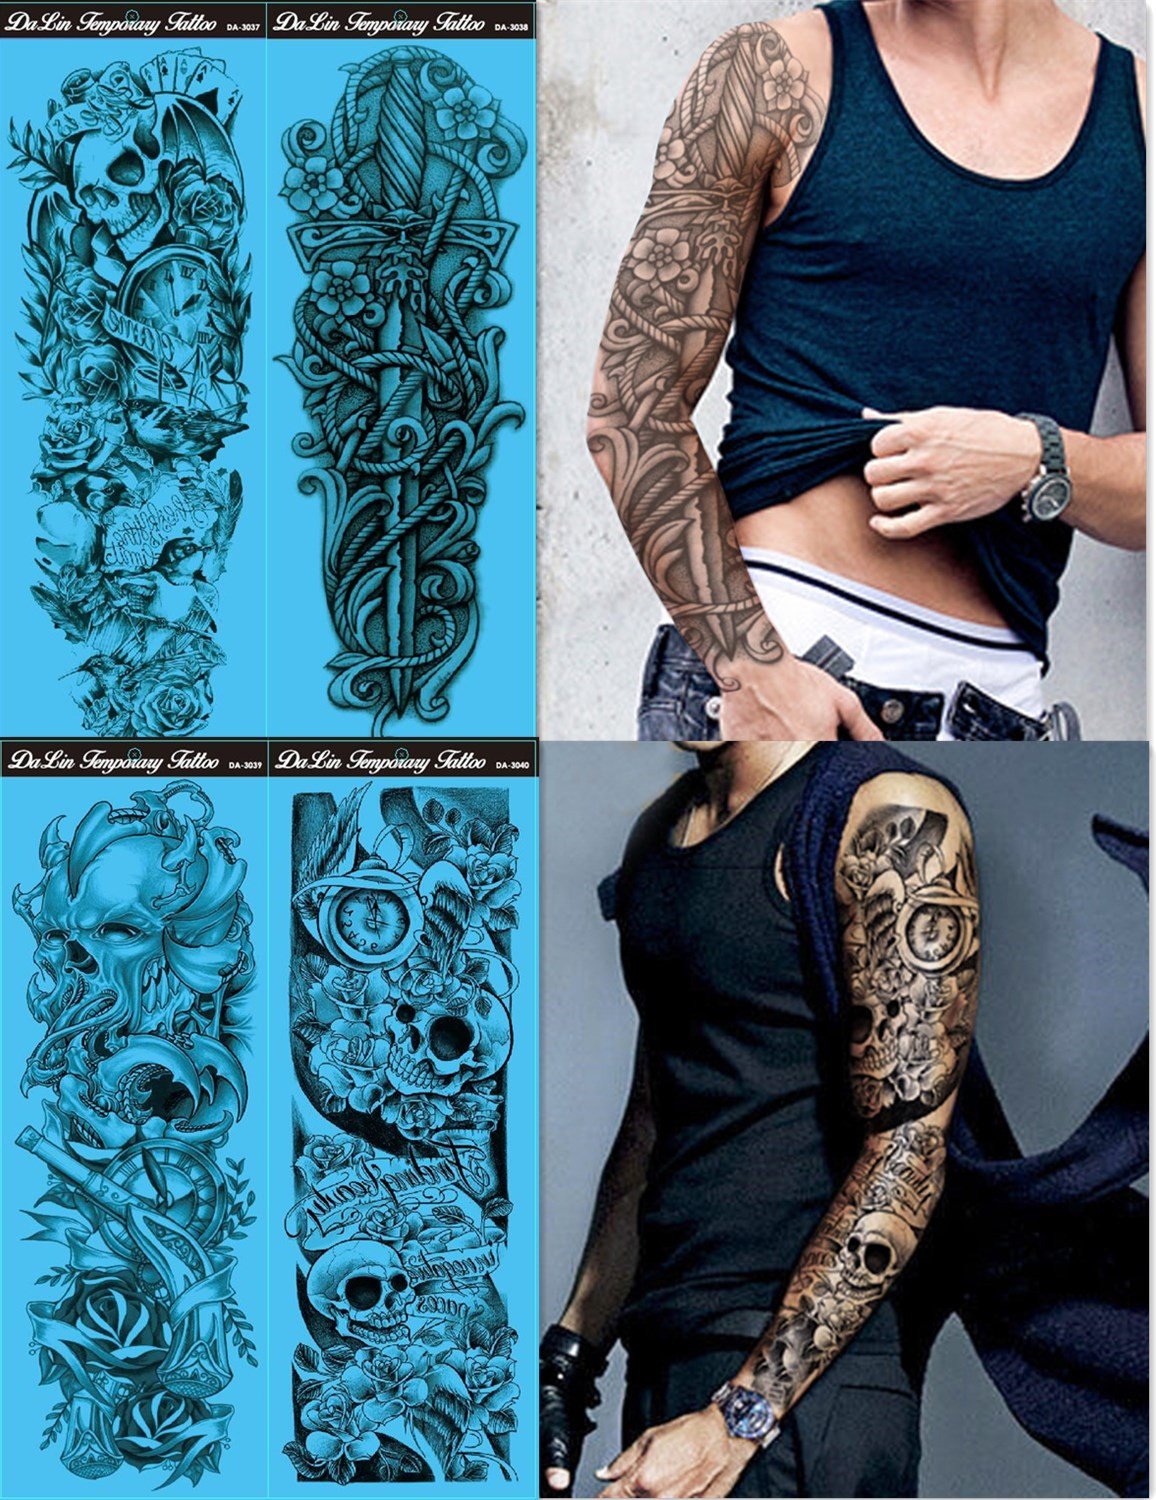 Amazon.com : 6 Sheets Large Temporary Tattoos,Tattoo Party Pack for  Women&Girls&Men 6 Sheets Large Temporary Tattoos Sleeves,Grier 6 Sheets Large  Fake Black Full Arm Tattoo Stickers : Beauty & Personal Care